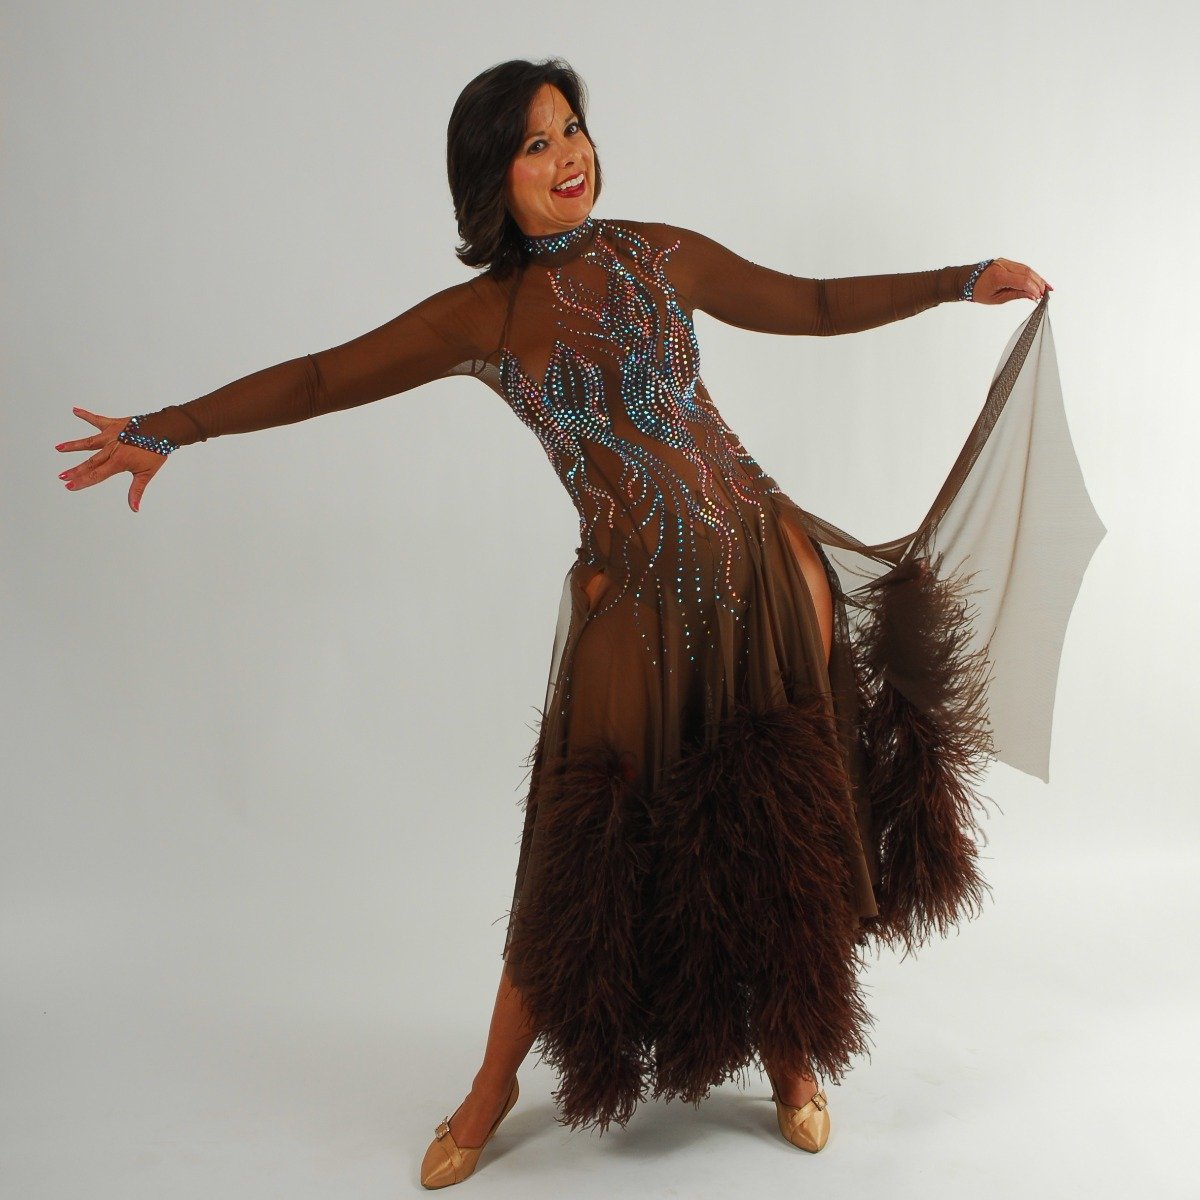 Crystal's Creations brown ballroom dress created of brown sheer mesh illusion with detailed Swarovski rhinestone work in aqua Abs & brown ostrich feathers